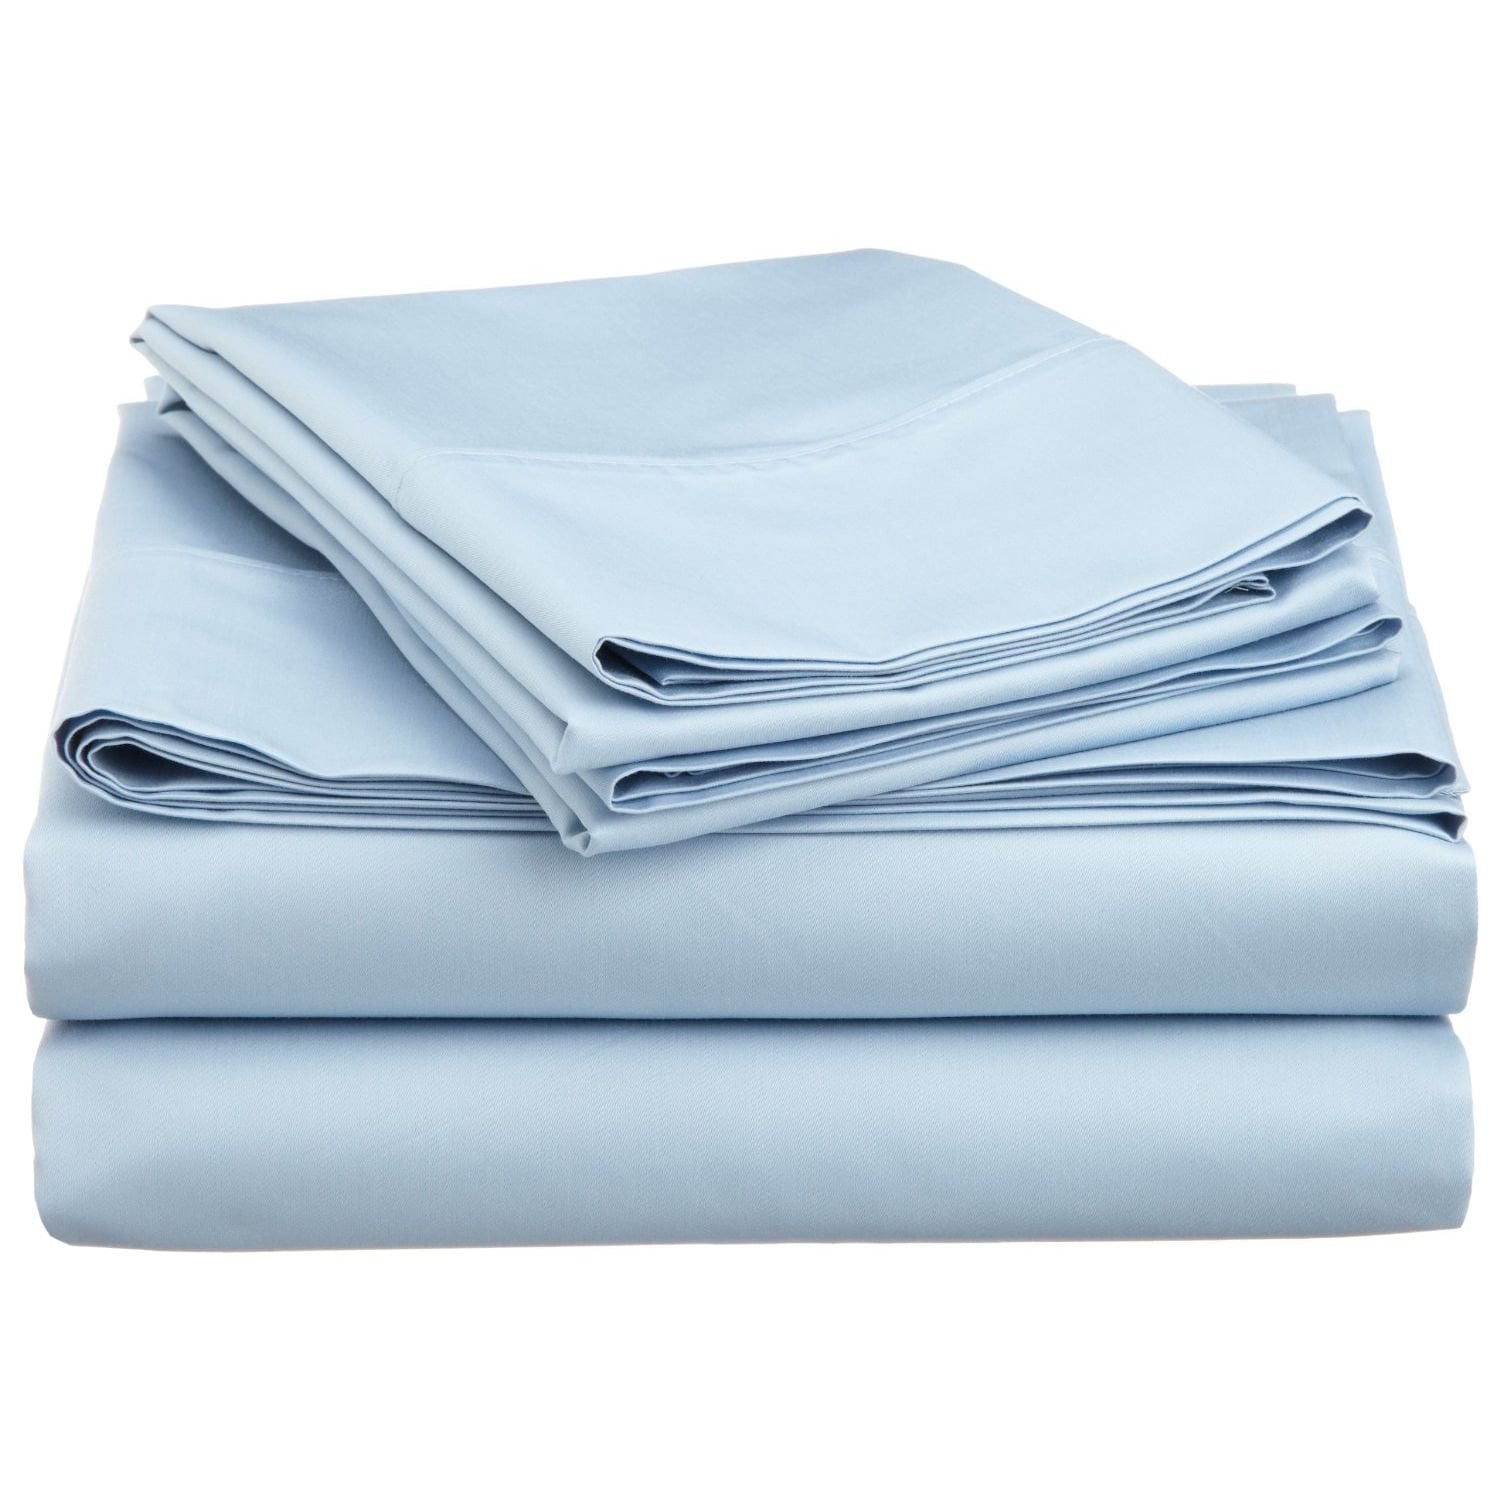 1000-Thread-Count 100% Egyptian Cotton Sheet Set Full Size Fits 15-18 Inches Deep Pocket ( Solid, Beach Blue )